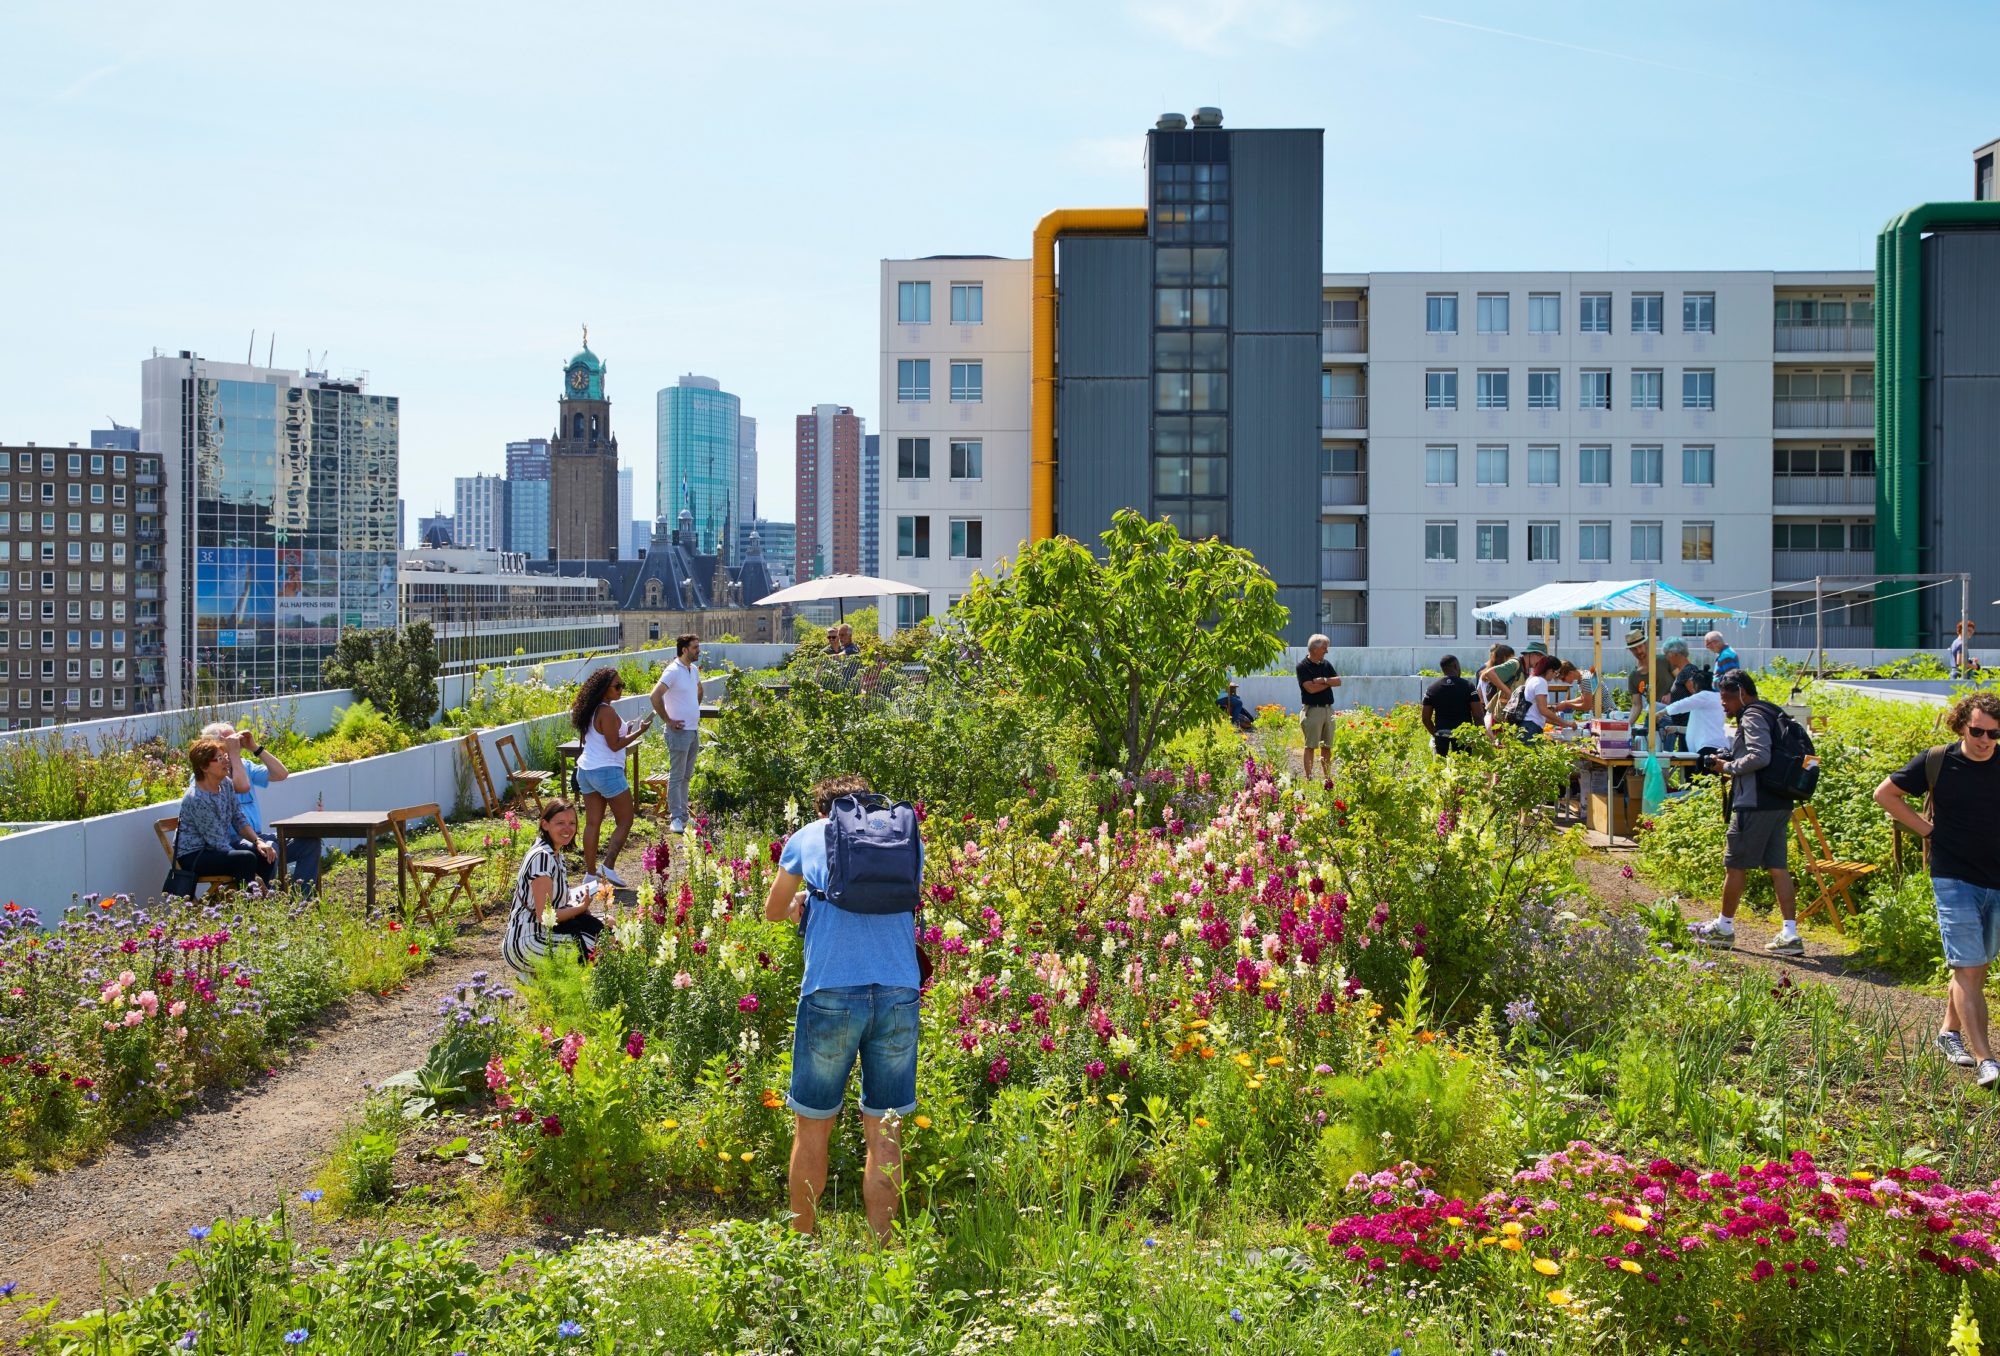 Green Infrastructure in an urban setting